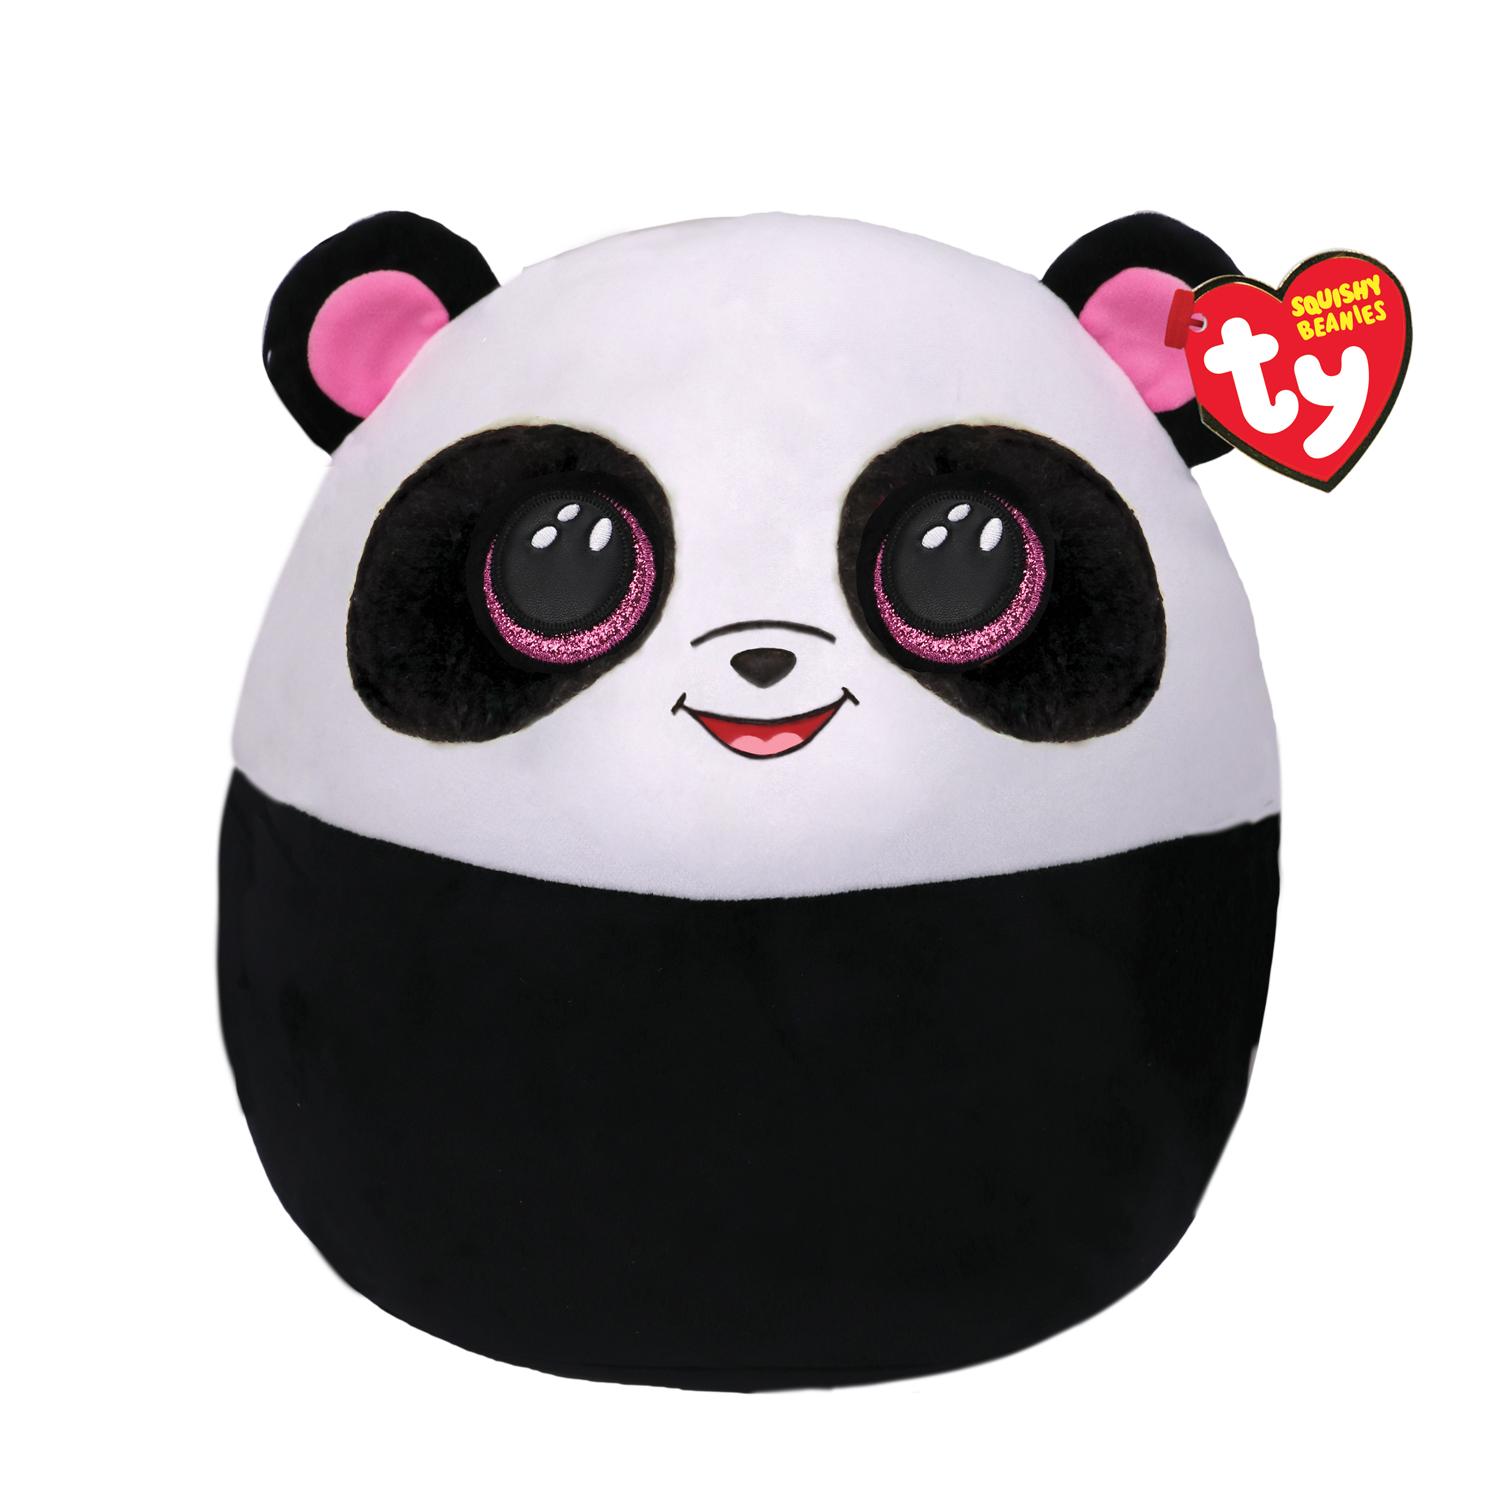 Bamboo The Panda TY Beanie Boos 15cm Standard Size Soft Toy